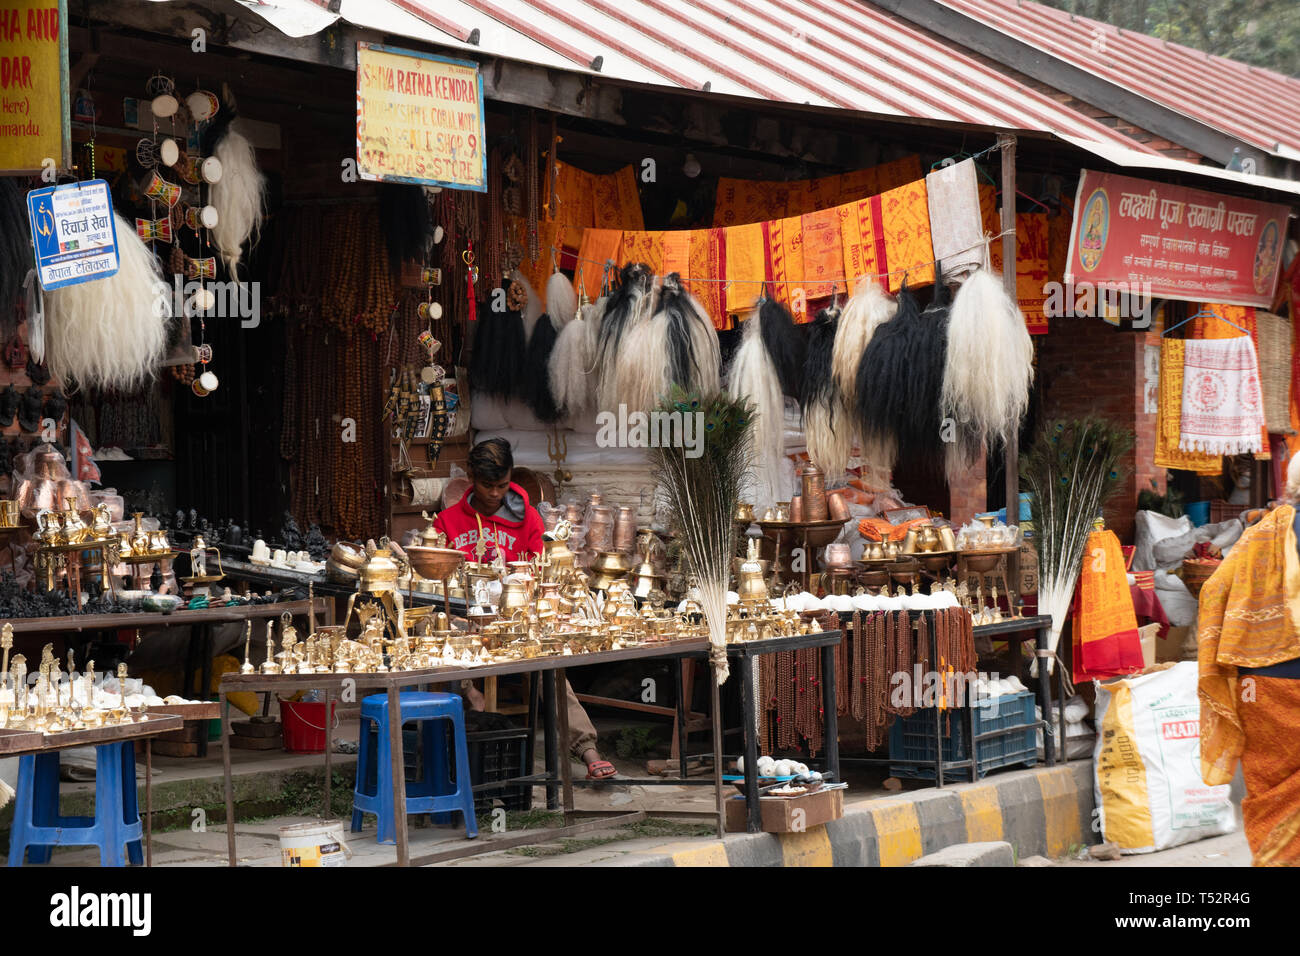 Kathmandu, Nepal - October 28, 2017: Spiritual and religious articles shop in the premises of Pashupatinath temple. Stock Photo